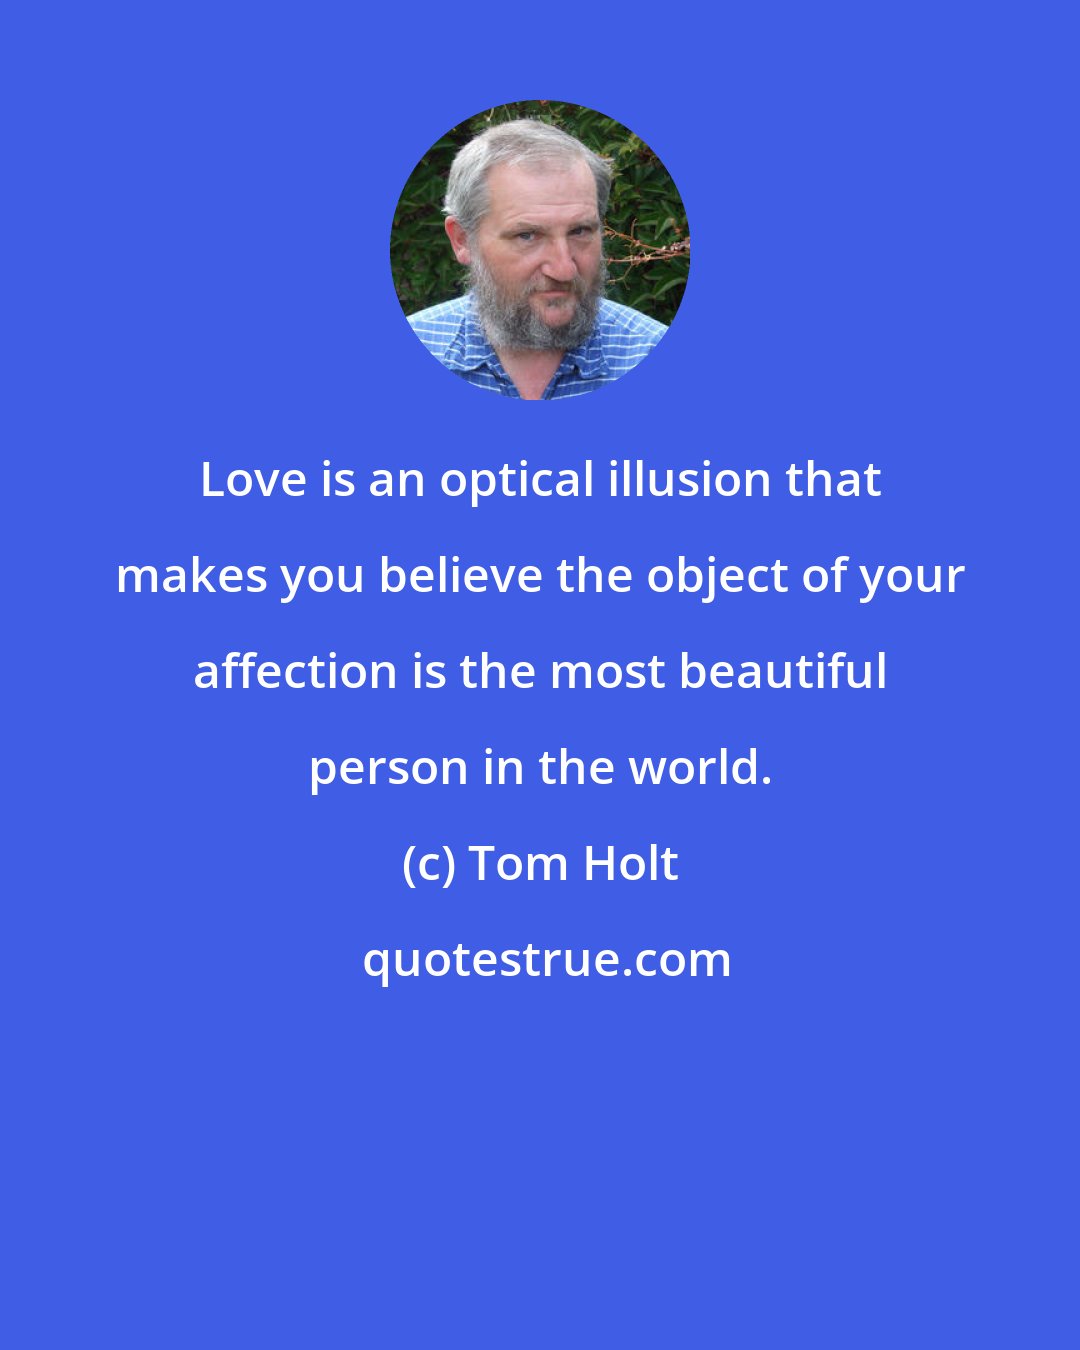 Tom Holt: Love is an optical illusion that makes you believe the object of your affection is the most beautiful person in the world.